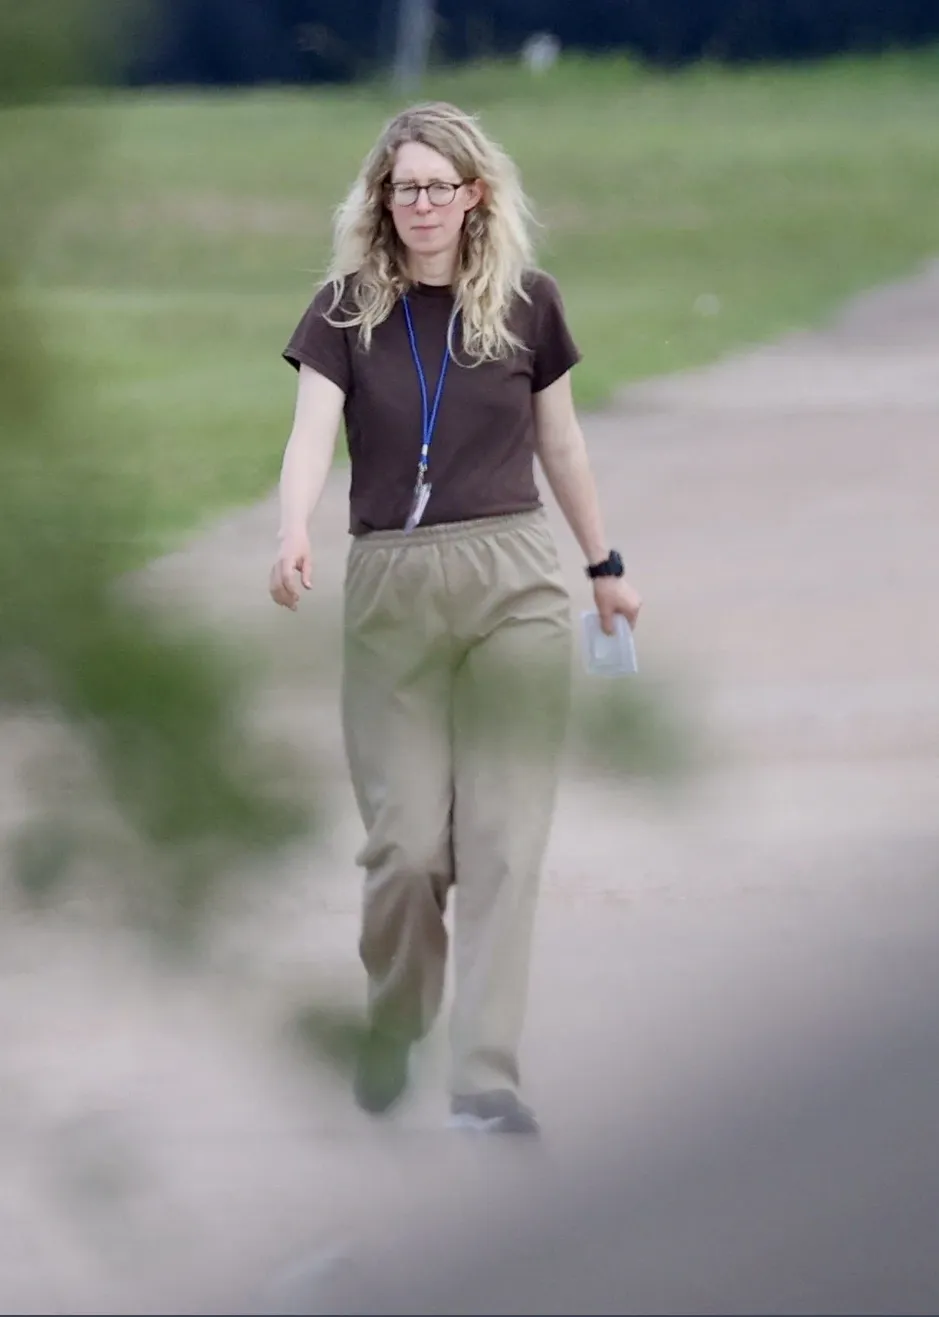 Elizabeth Holmes, in glasses and prison garb, is seen walking toward the camera.